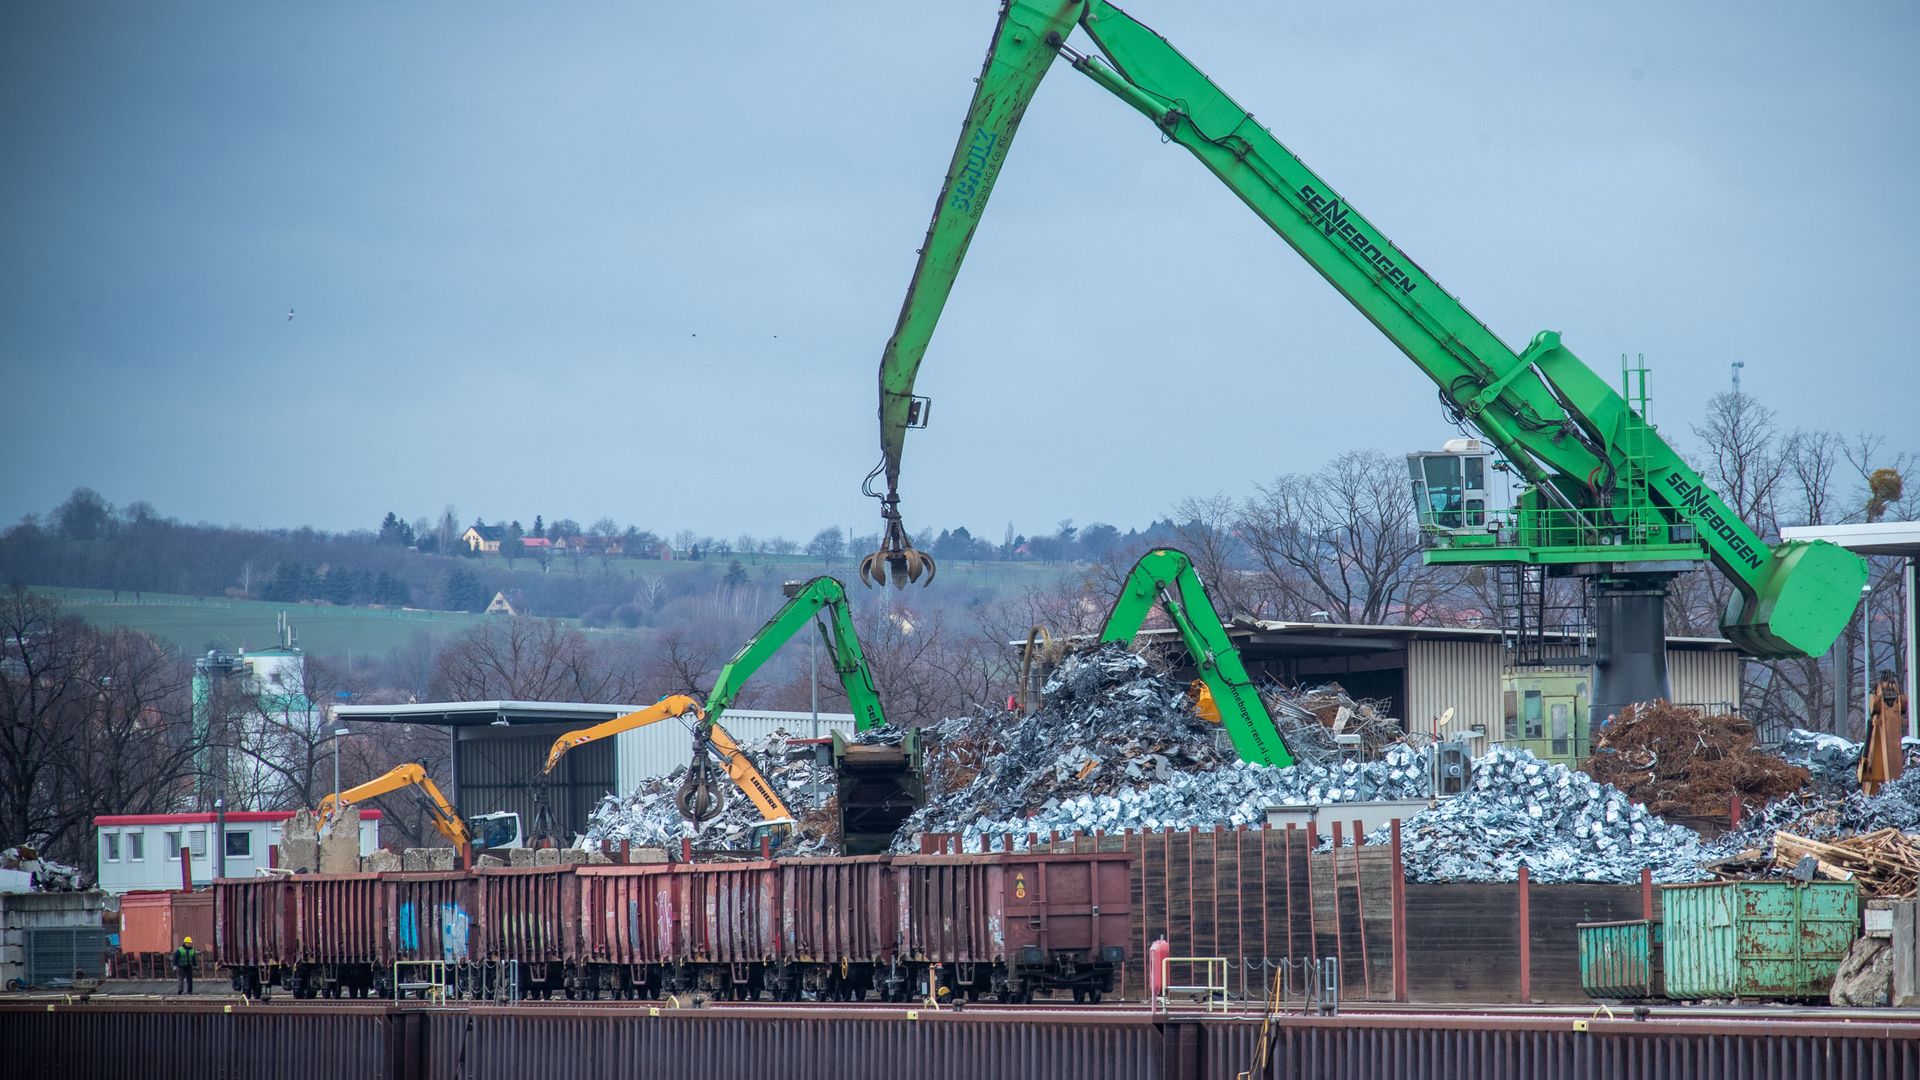 Cranes load freight cars with scrap metal in Dresden, Germany.